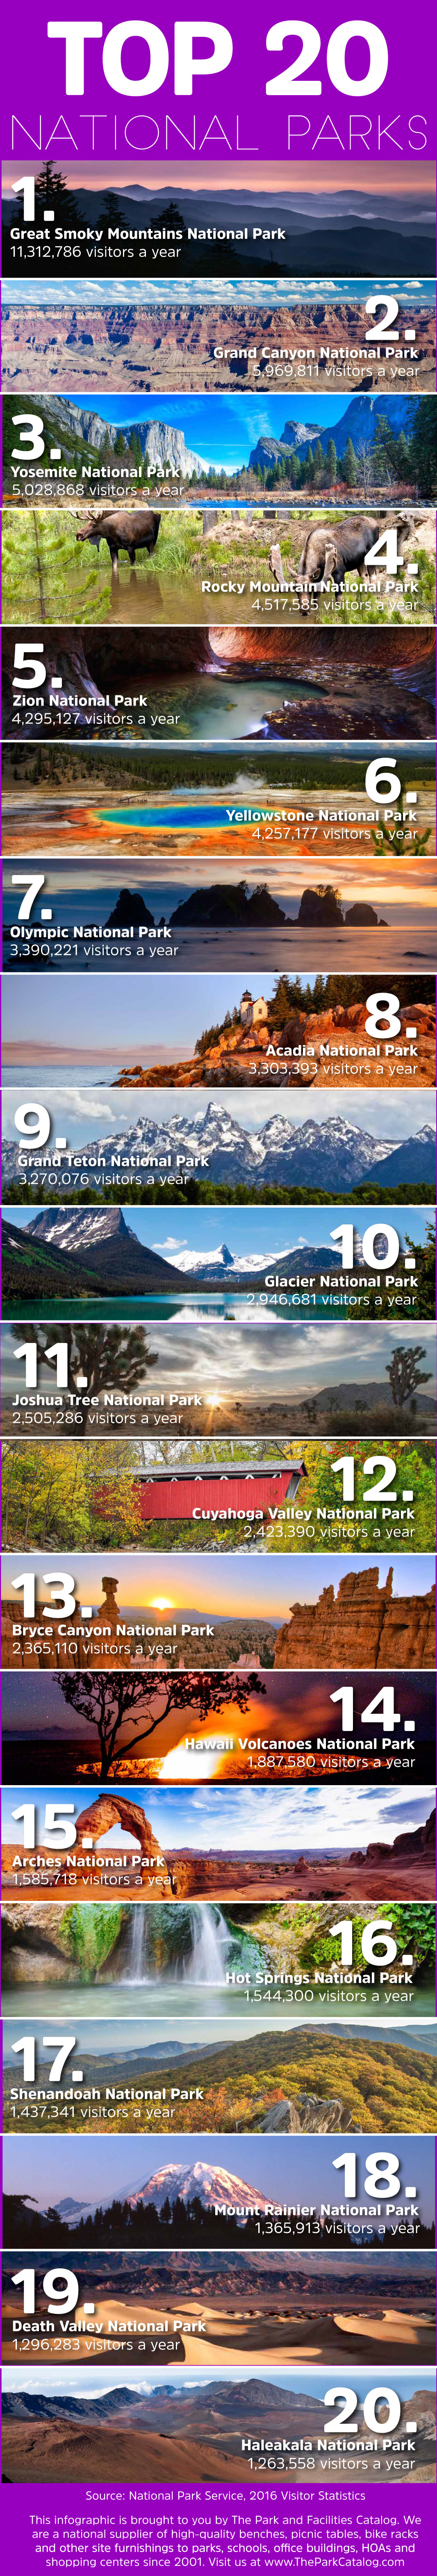 Top 20 National Parks